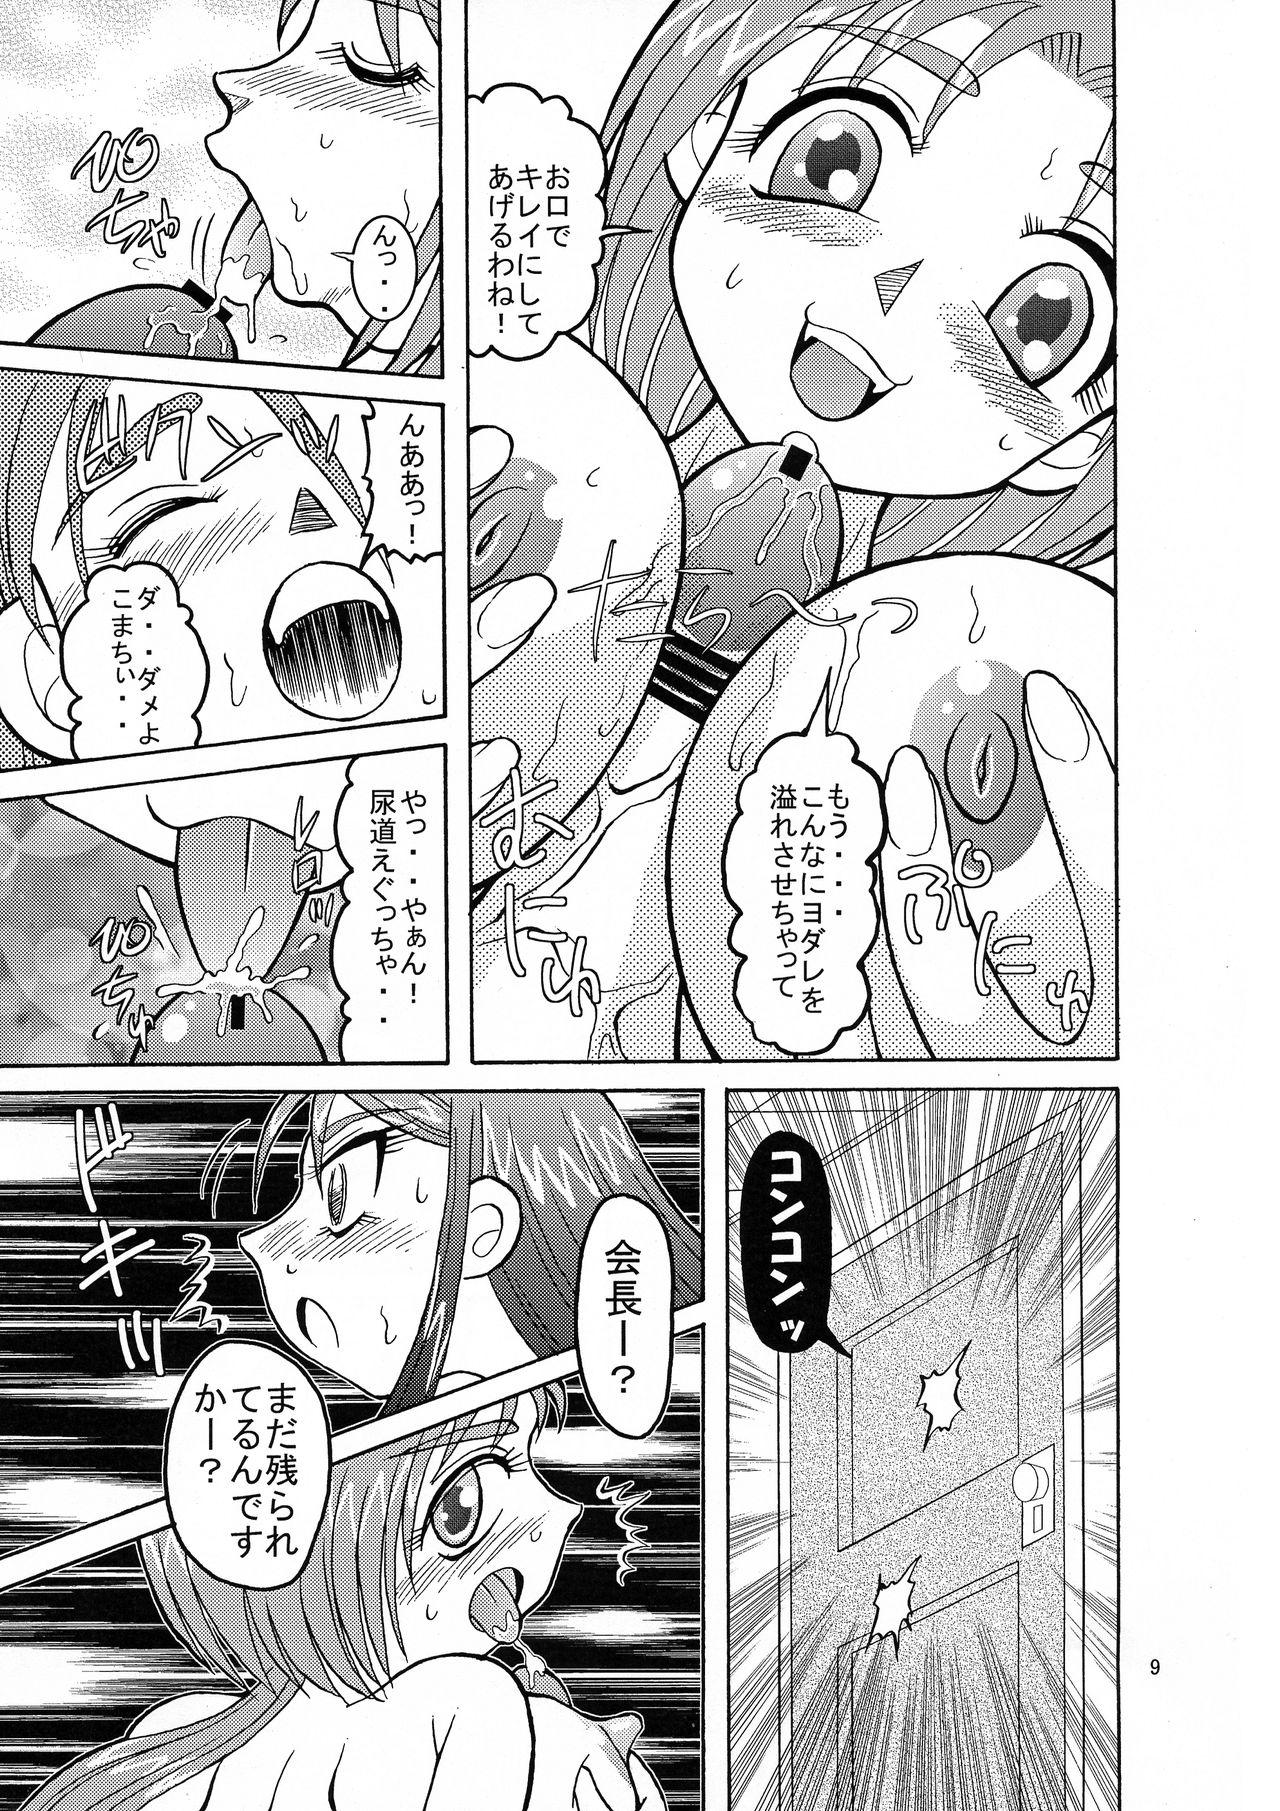 18yo Komakare GO! GO! - Yes precure 5 Milfporn - Page 9